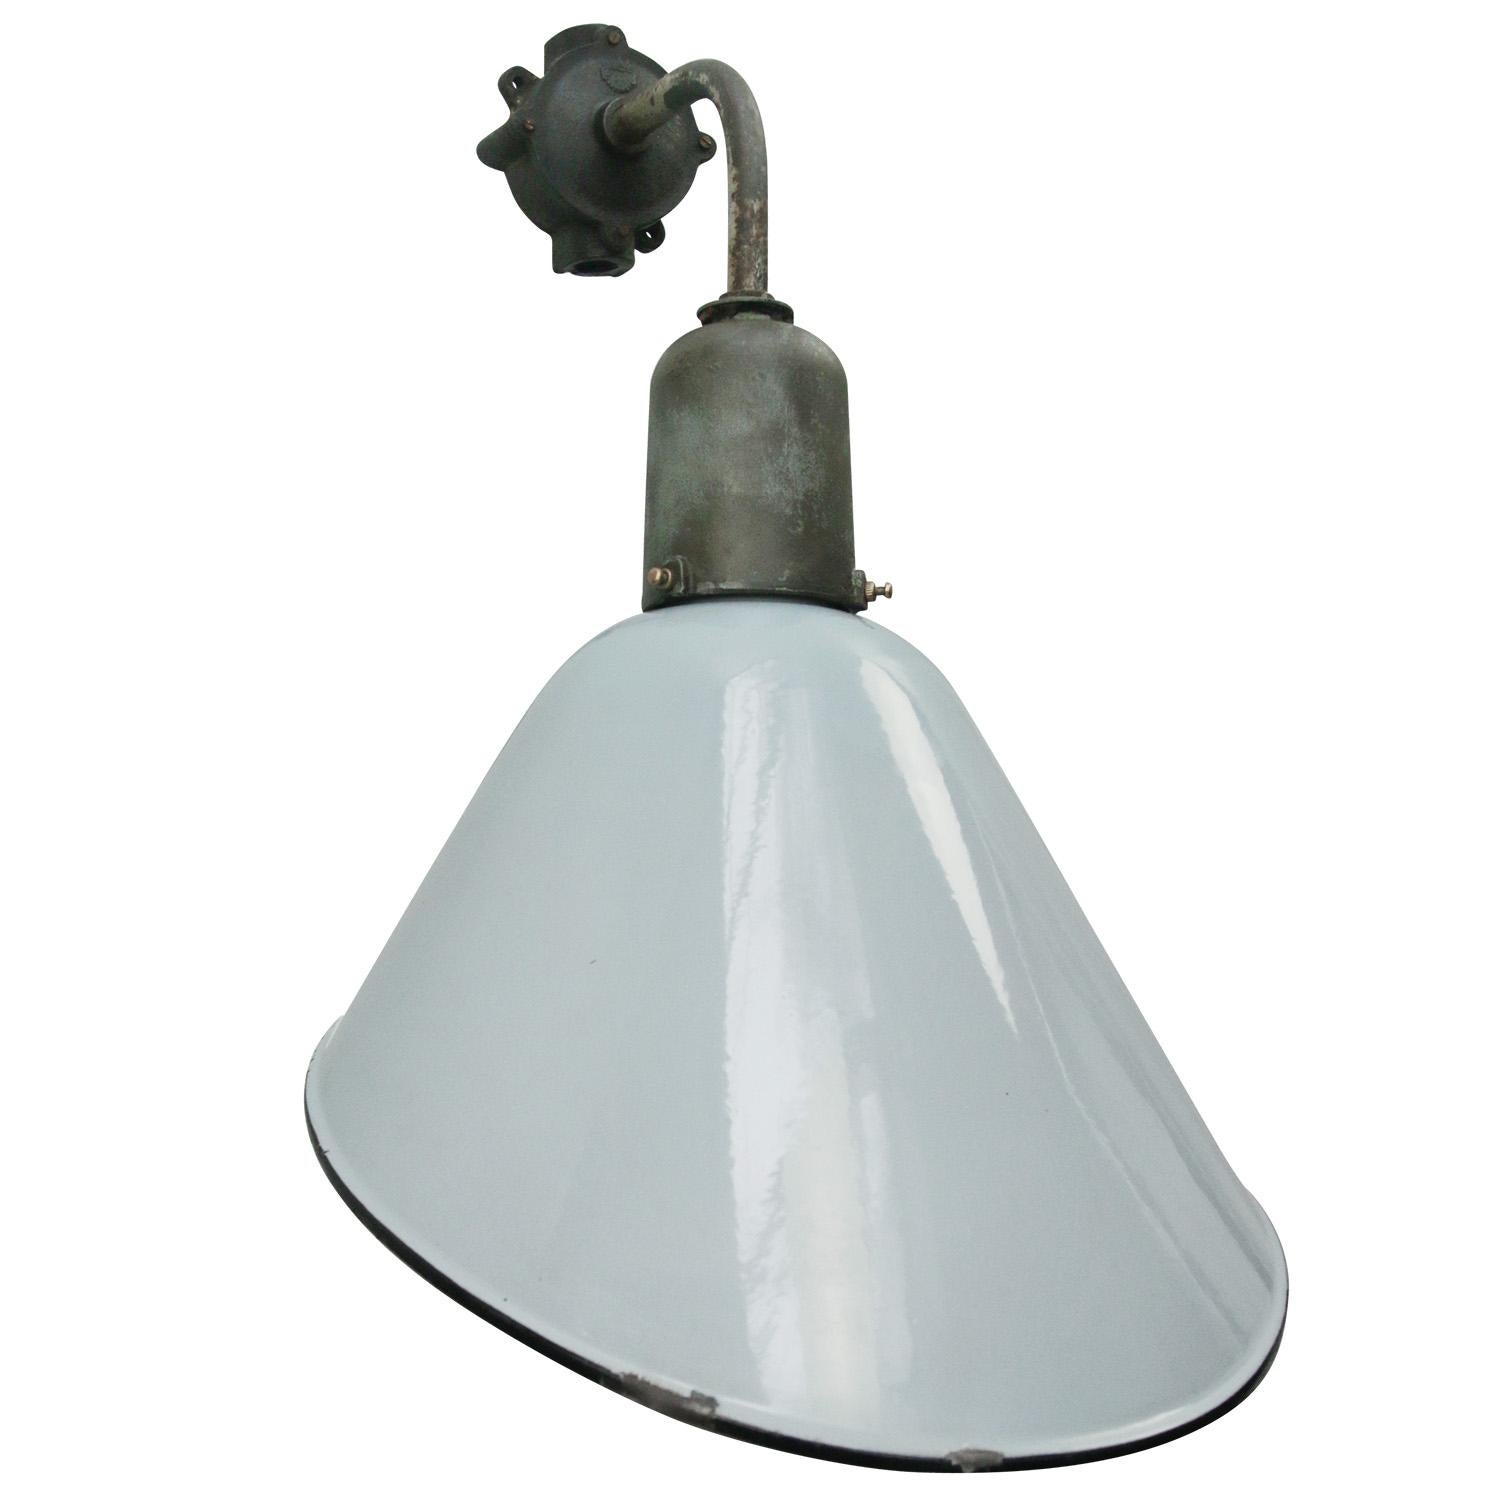 Dutch Gray Enamel Vintage Industrial Scone Wall Light In Good Condition For Sale In Amsterdam, NL